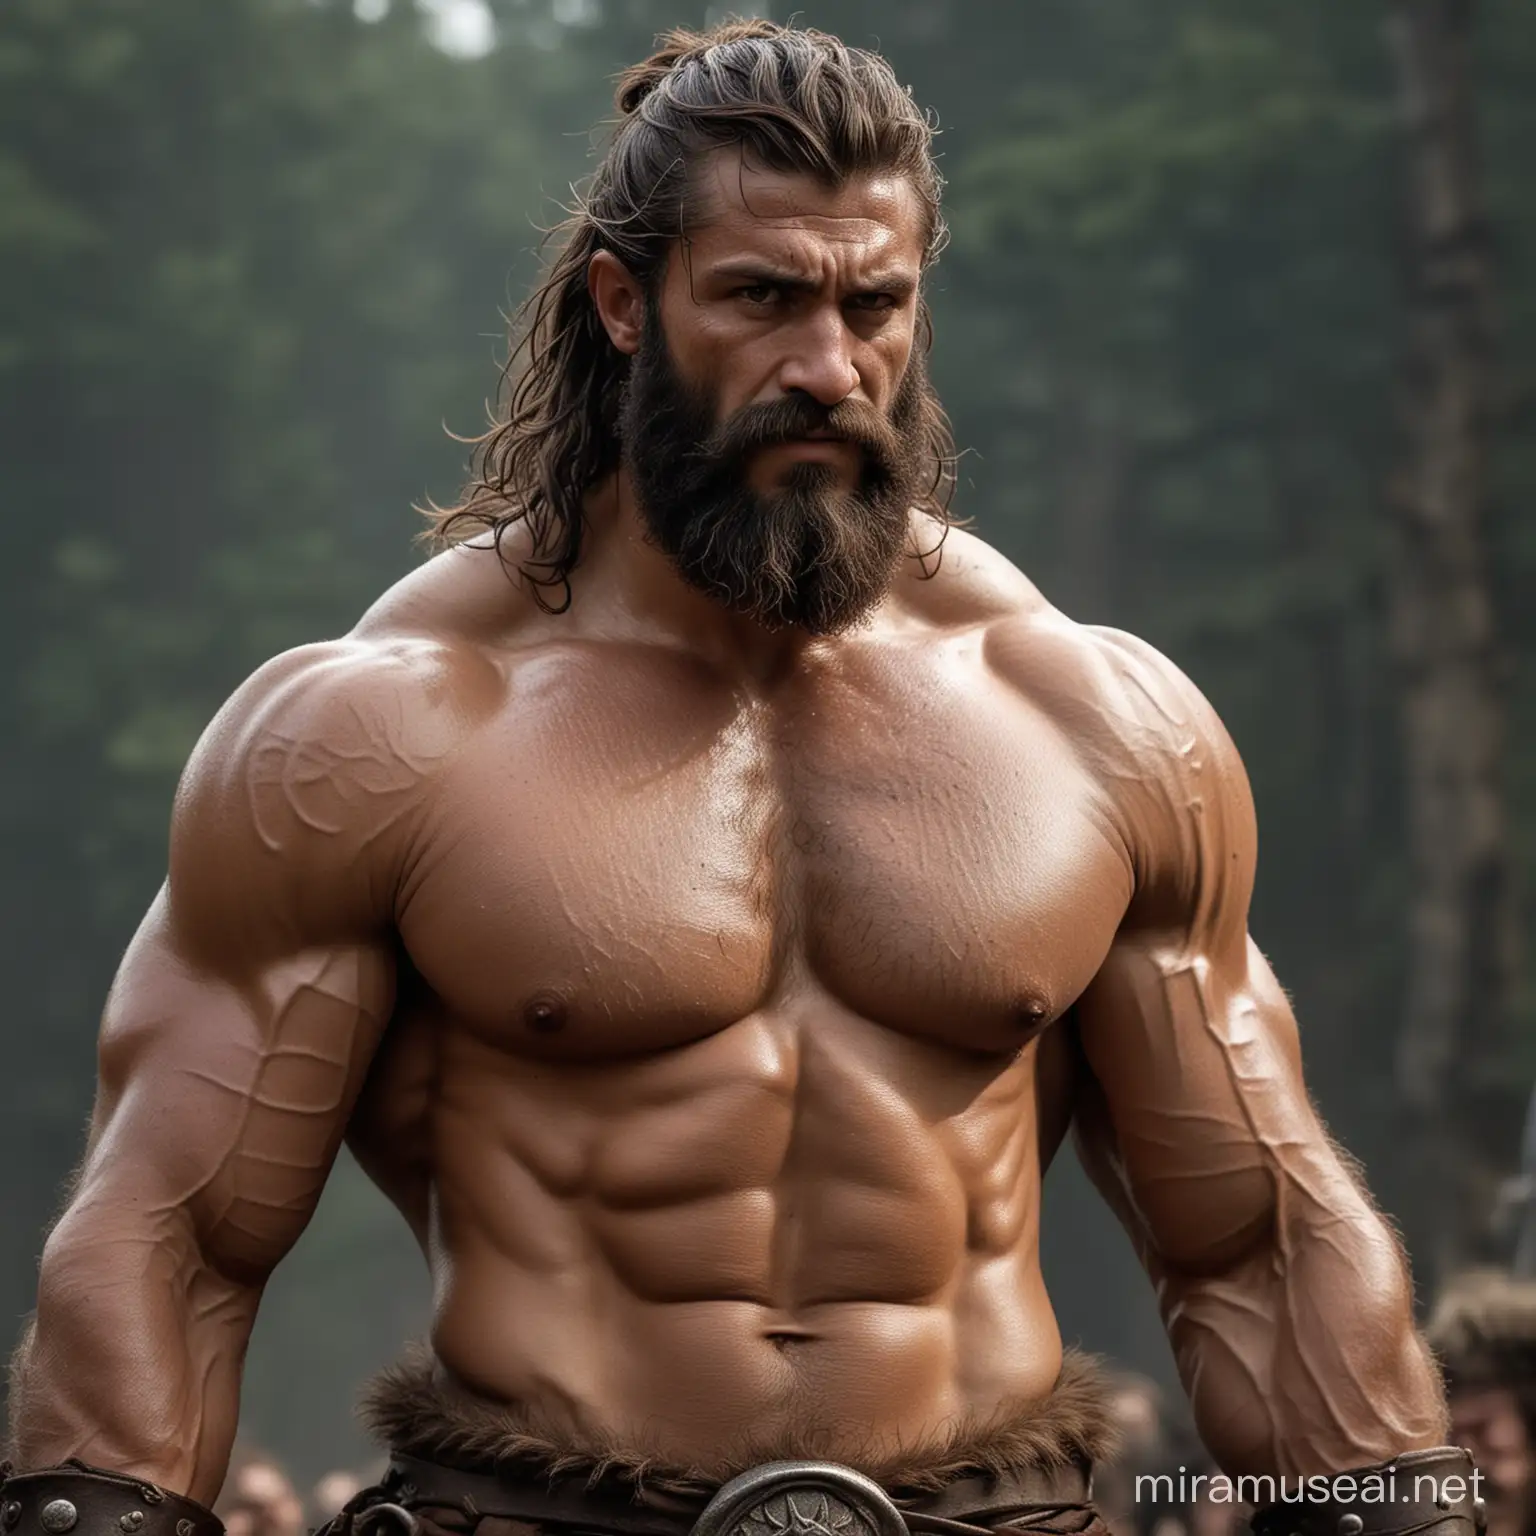 Barbarian Warrior with Untamed Hair and Muscular Build